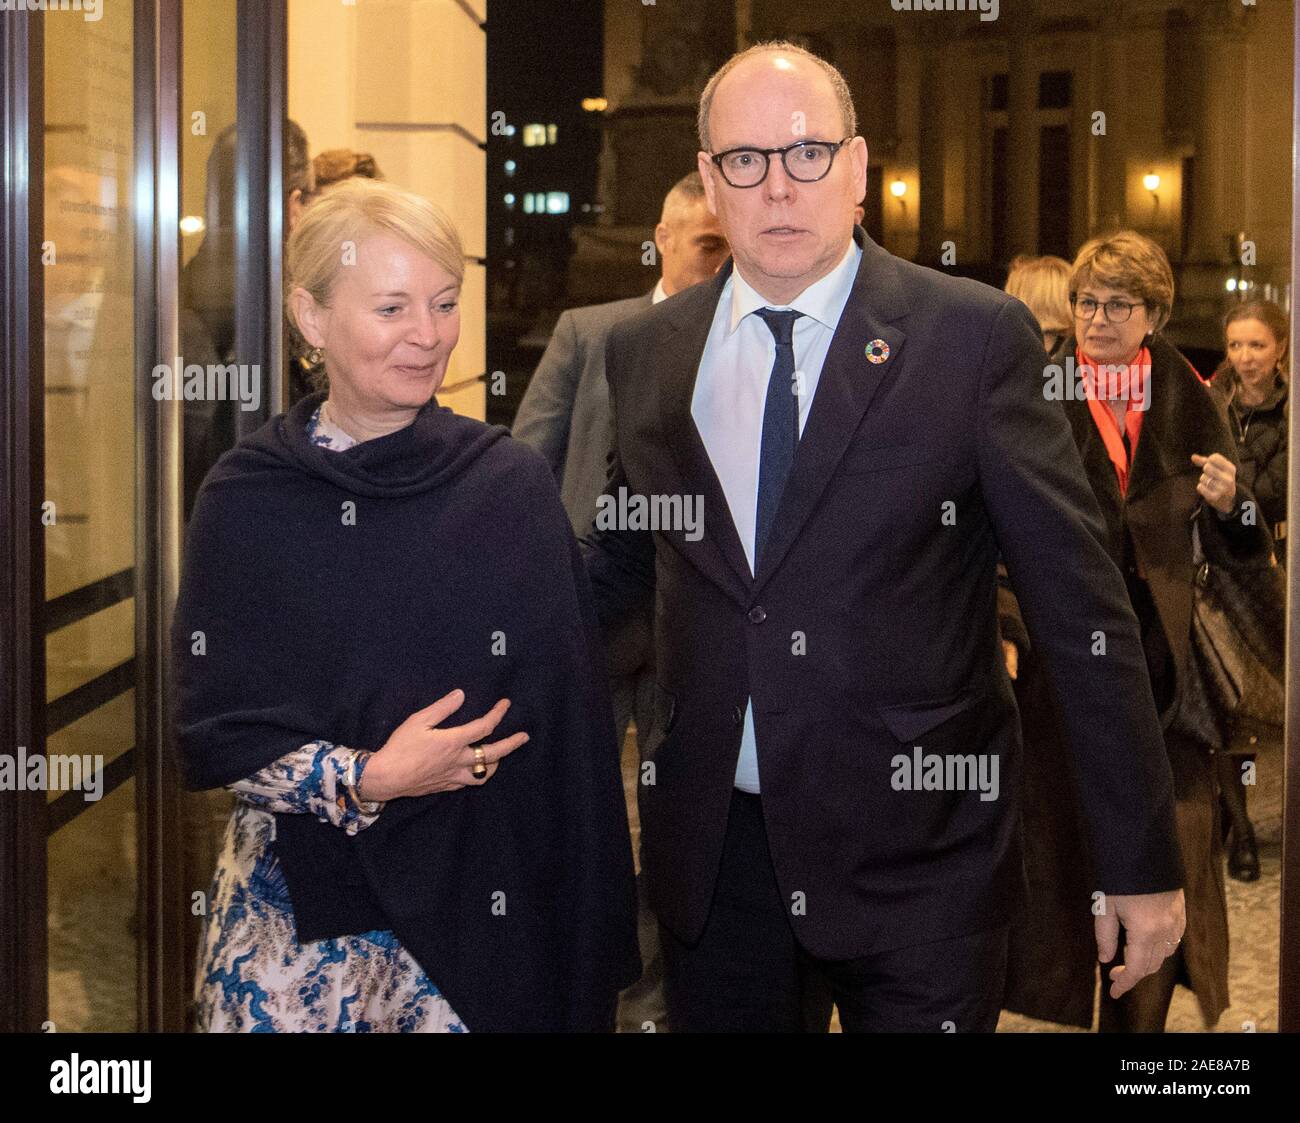 Potsdam, Germany. 04th Dec, 2019. Prince Albert II of Monaco and Ortrud Westheider, director of the Barberini Museum, come to the Barberini Museum for a reception. Prince Albert II had previously visited the Hasso Plattner Institute during his visit to Potsdam. Credit: Monika Skolimowska/dpa-Zentralbild/ZB/dpa/Alamy Live News Stock Photo